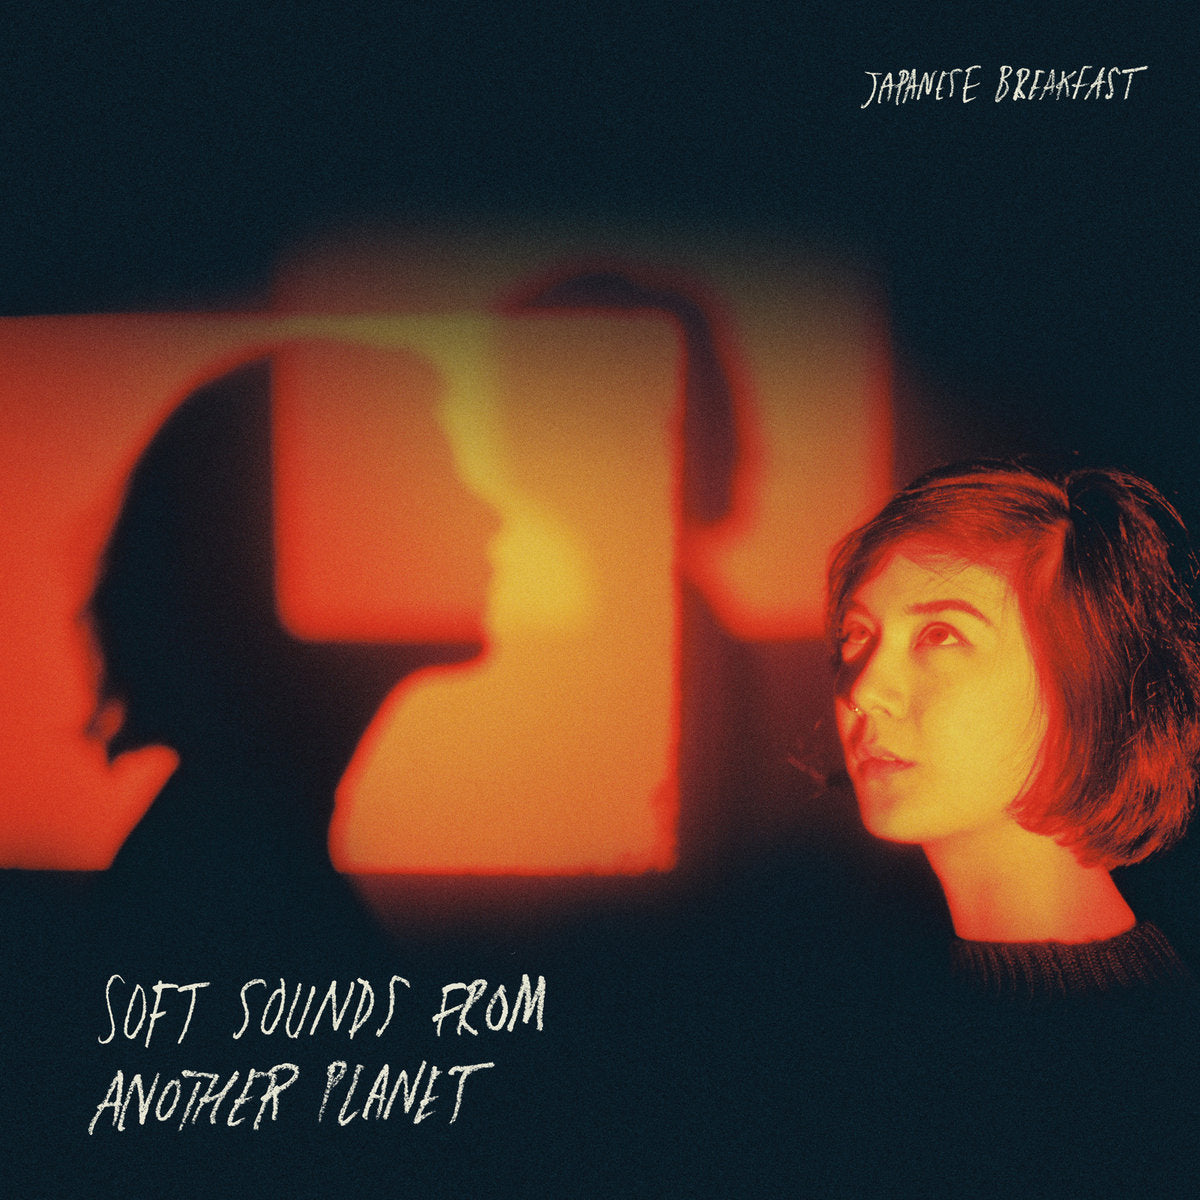 JAPANESE BREAKFAST 'SOFT SOUNDS FROM ANOTHER PLANET'